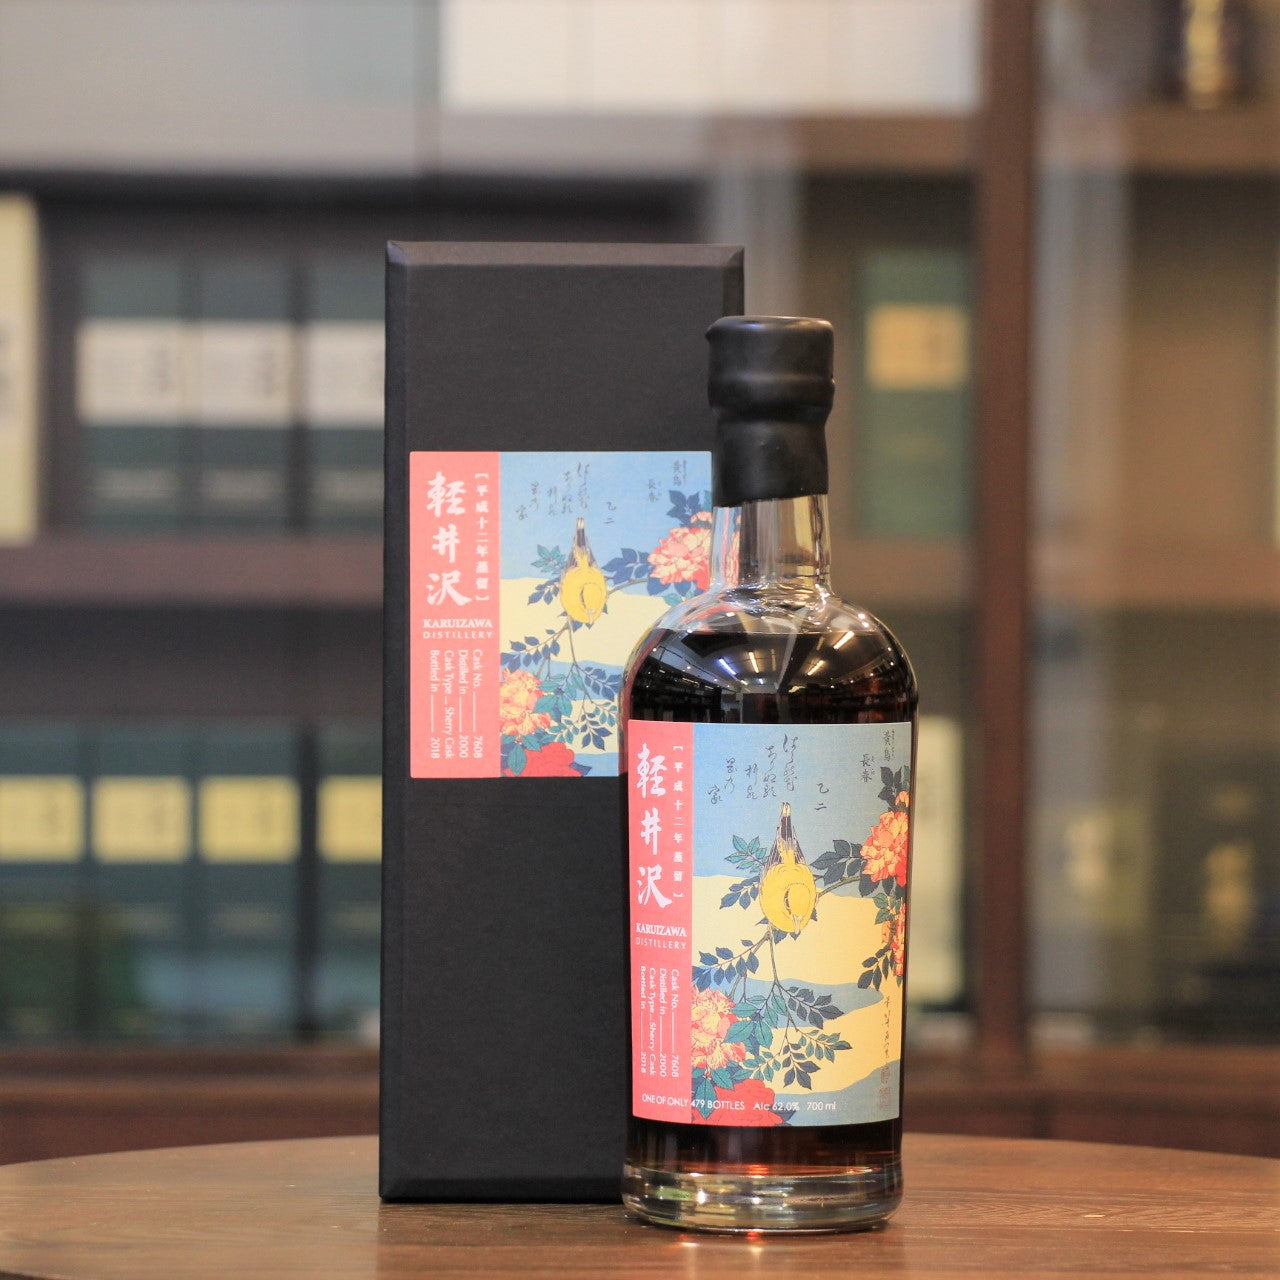 This rare whisky from closed distillery Karuizawa has been matured in a sherry cask for 18 years.